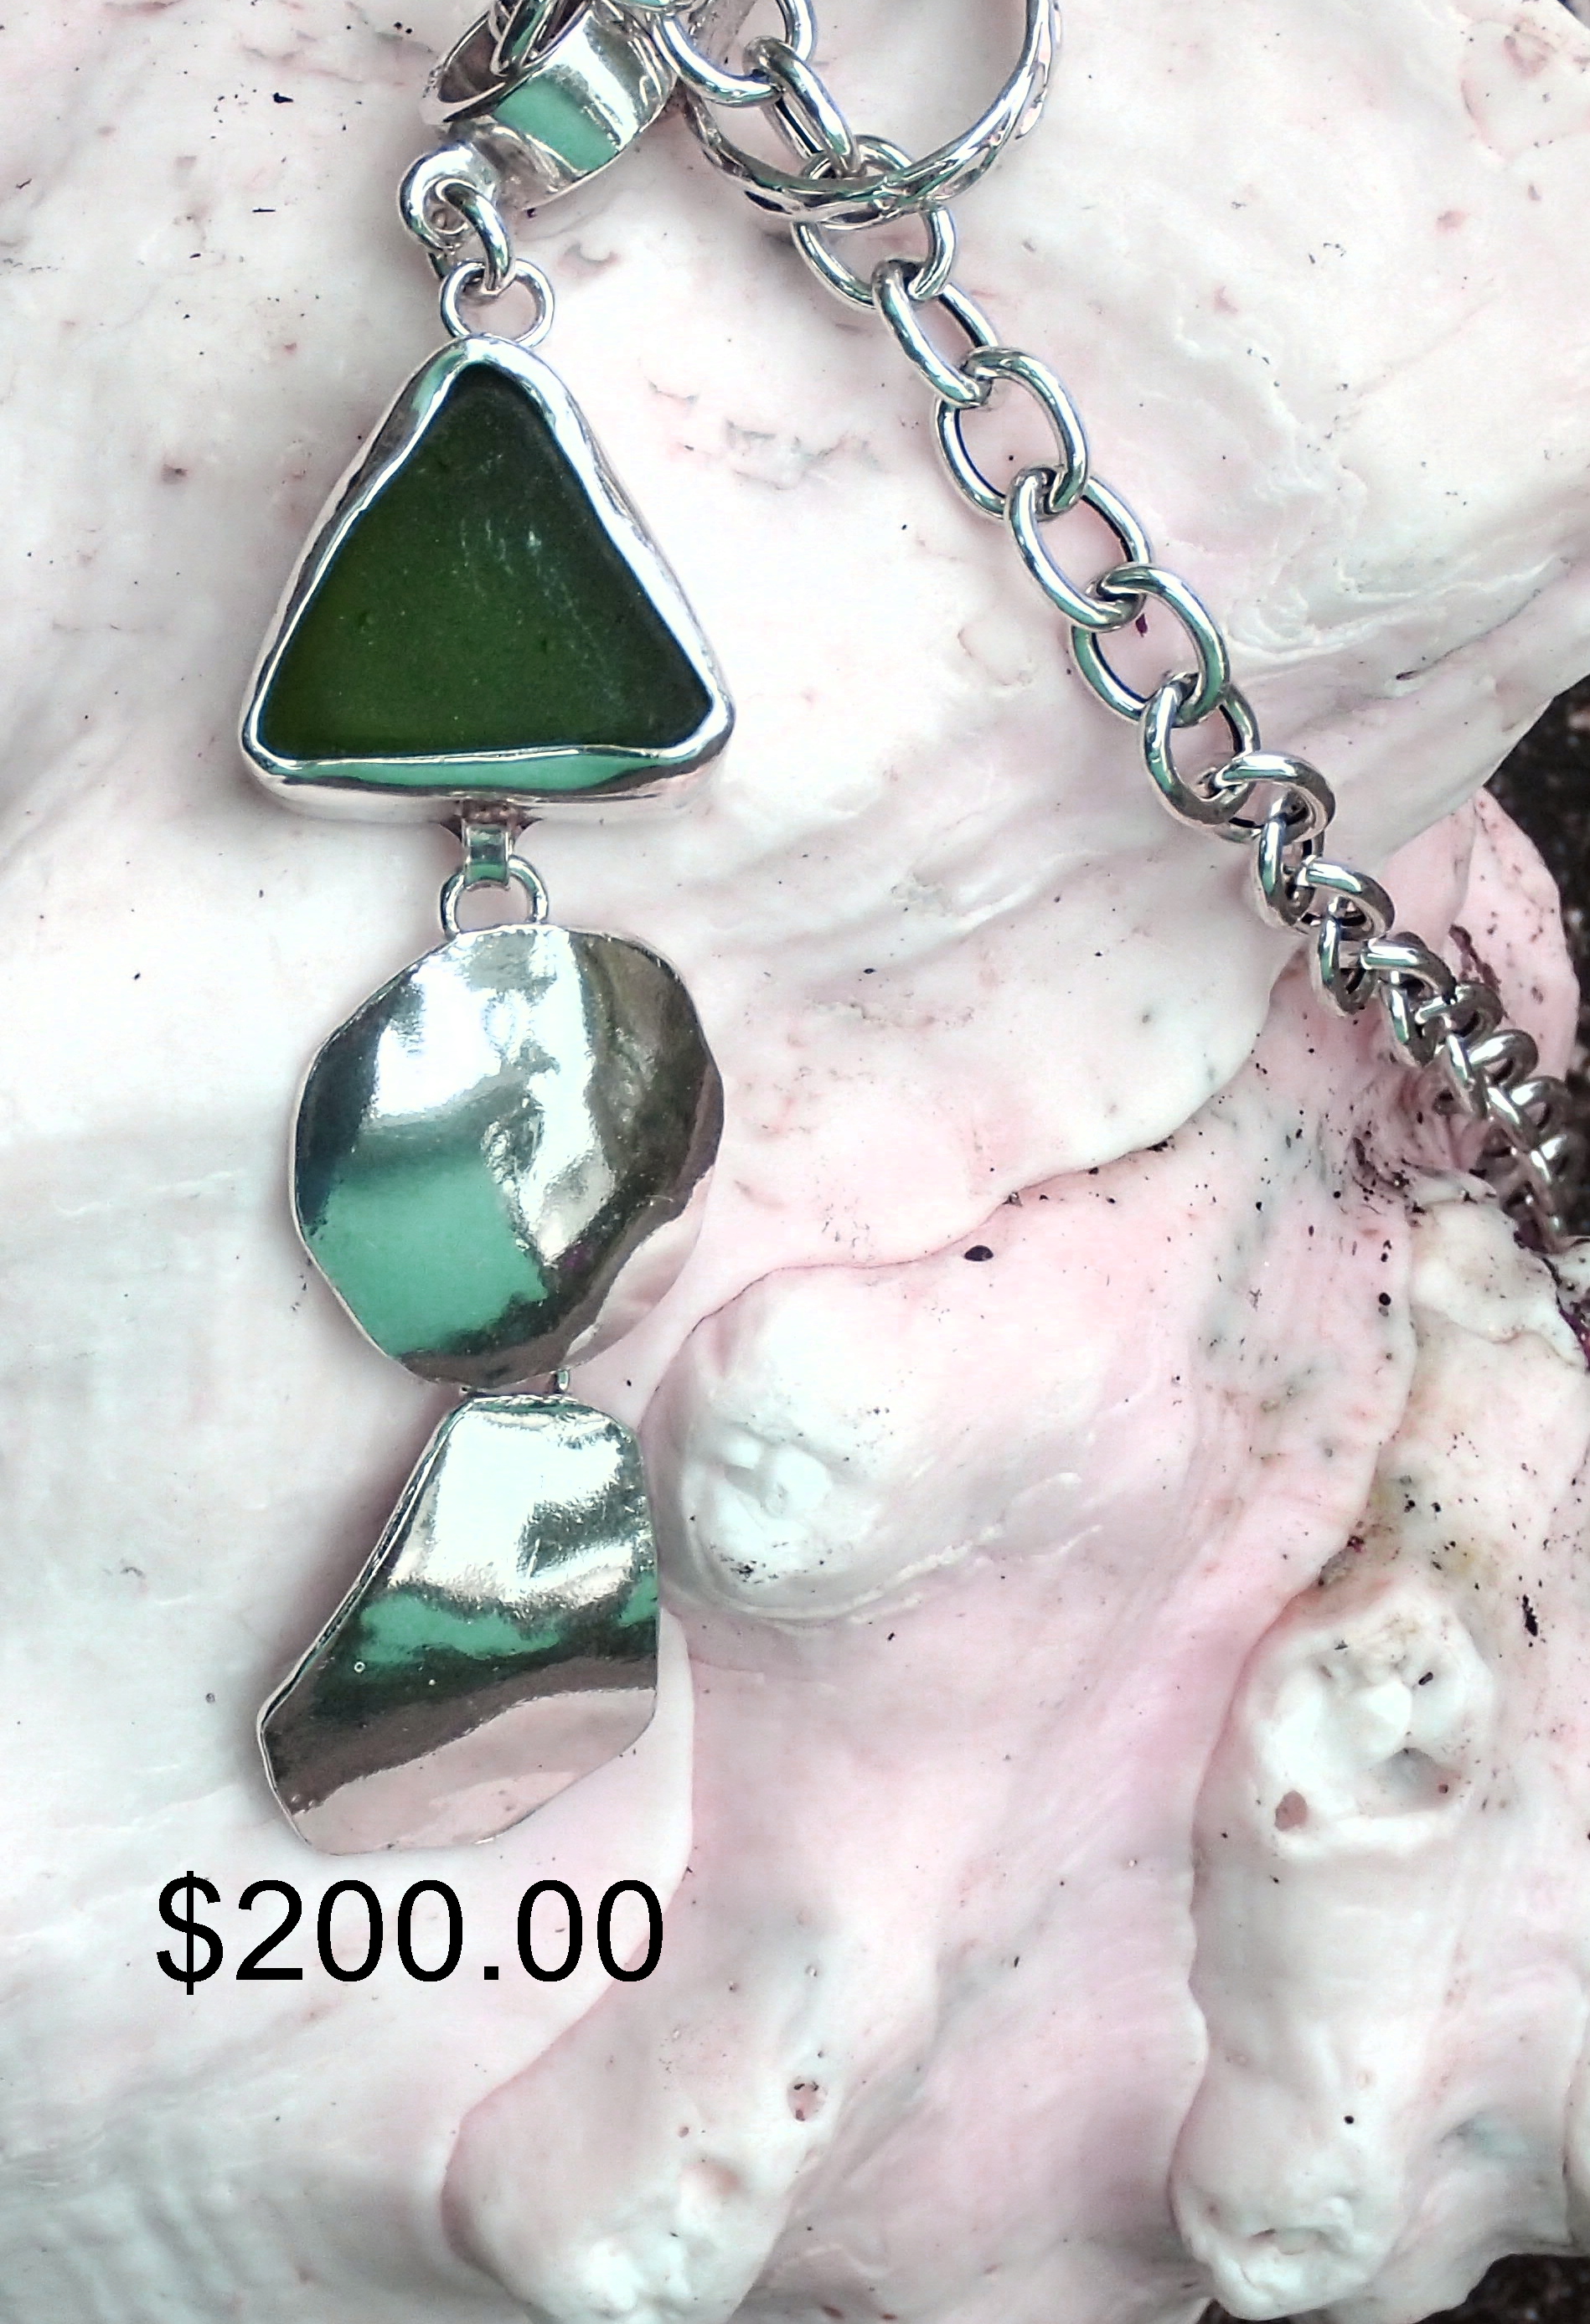 Chunky triangle antique green seaglass forms the head of a fish with fine silver finish.